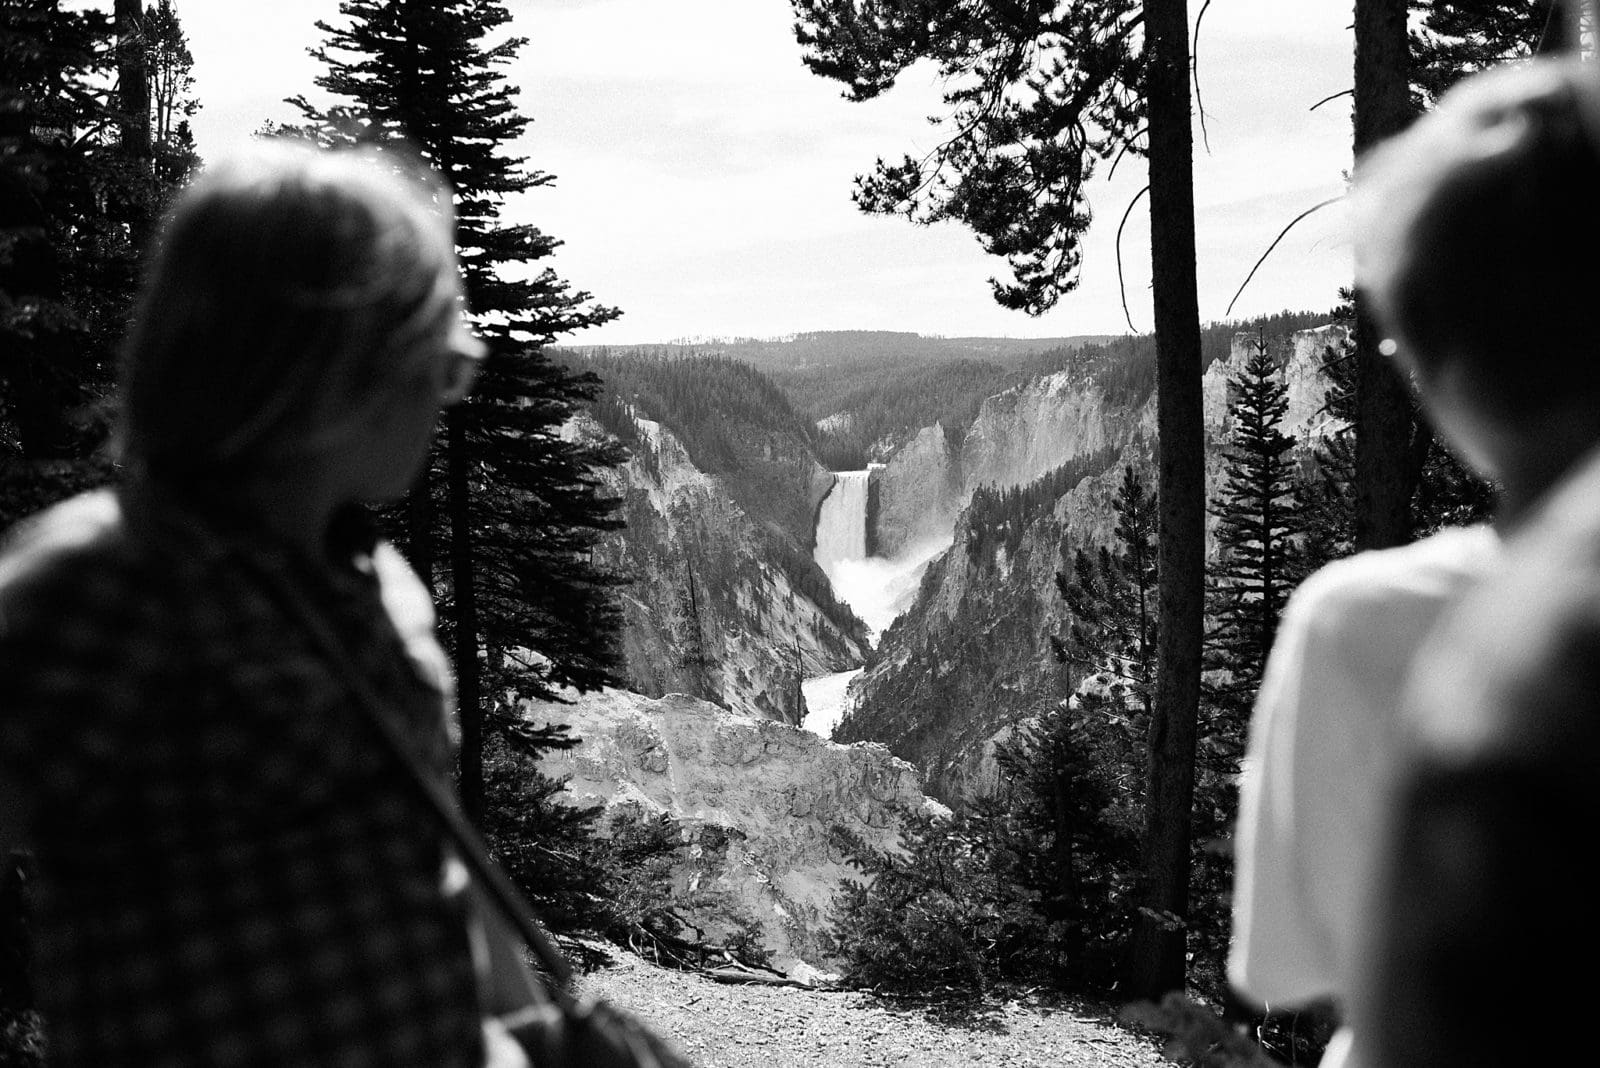 lower falls in yellowstone national park